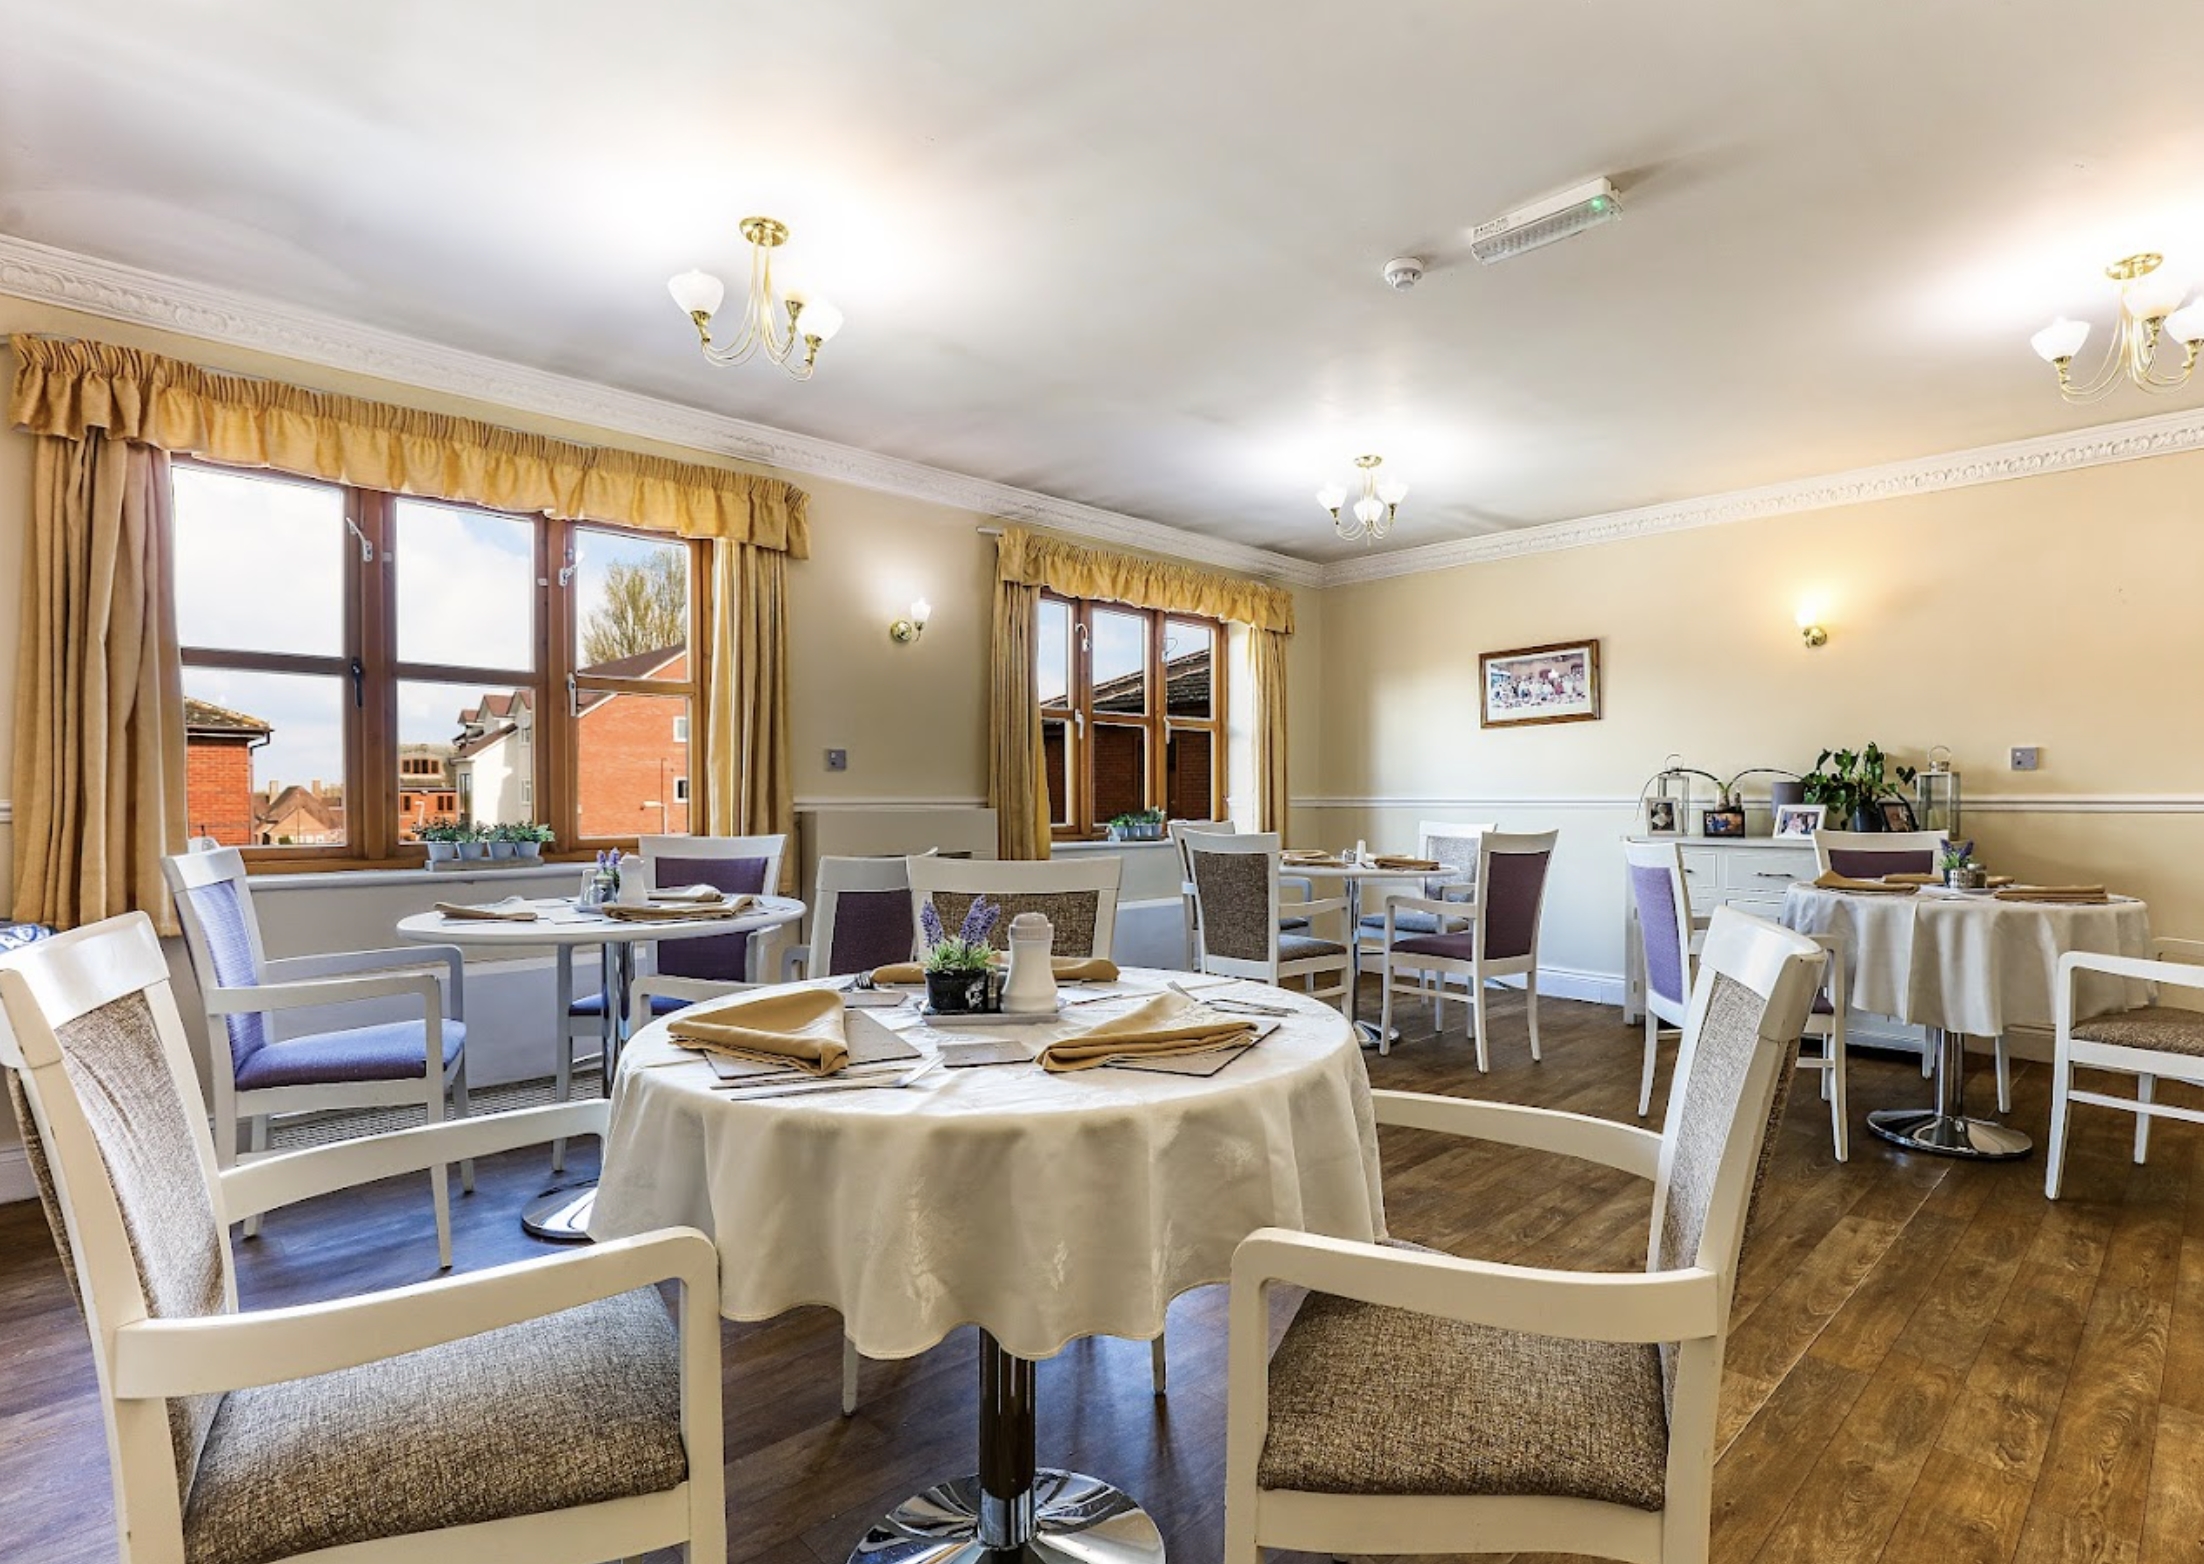 Dining room of Harmony House care home in Nuneaton, Warwickshire